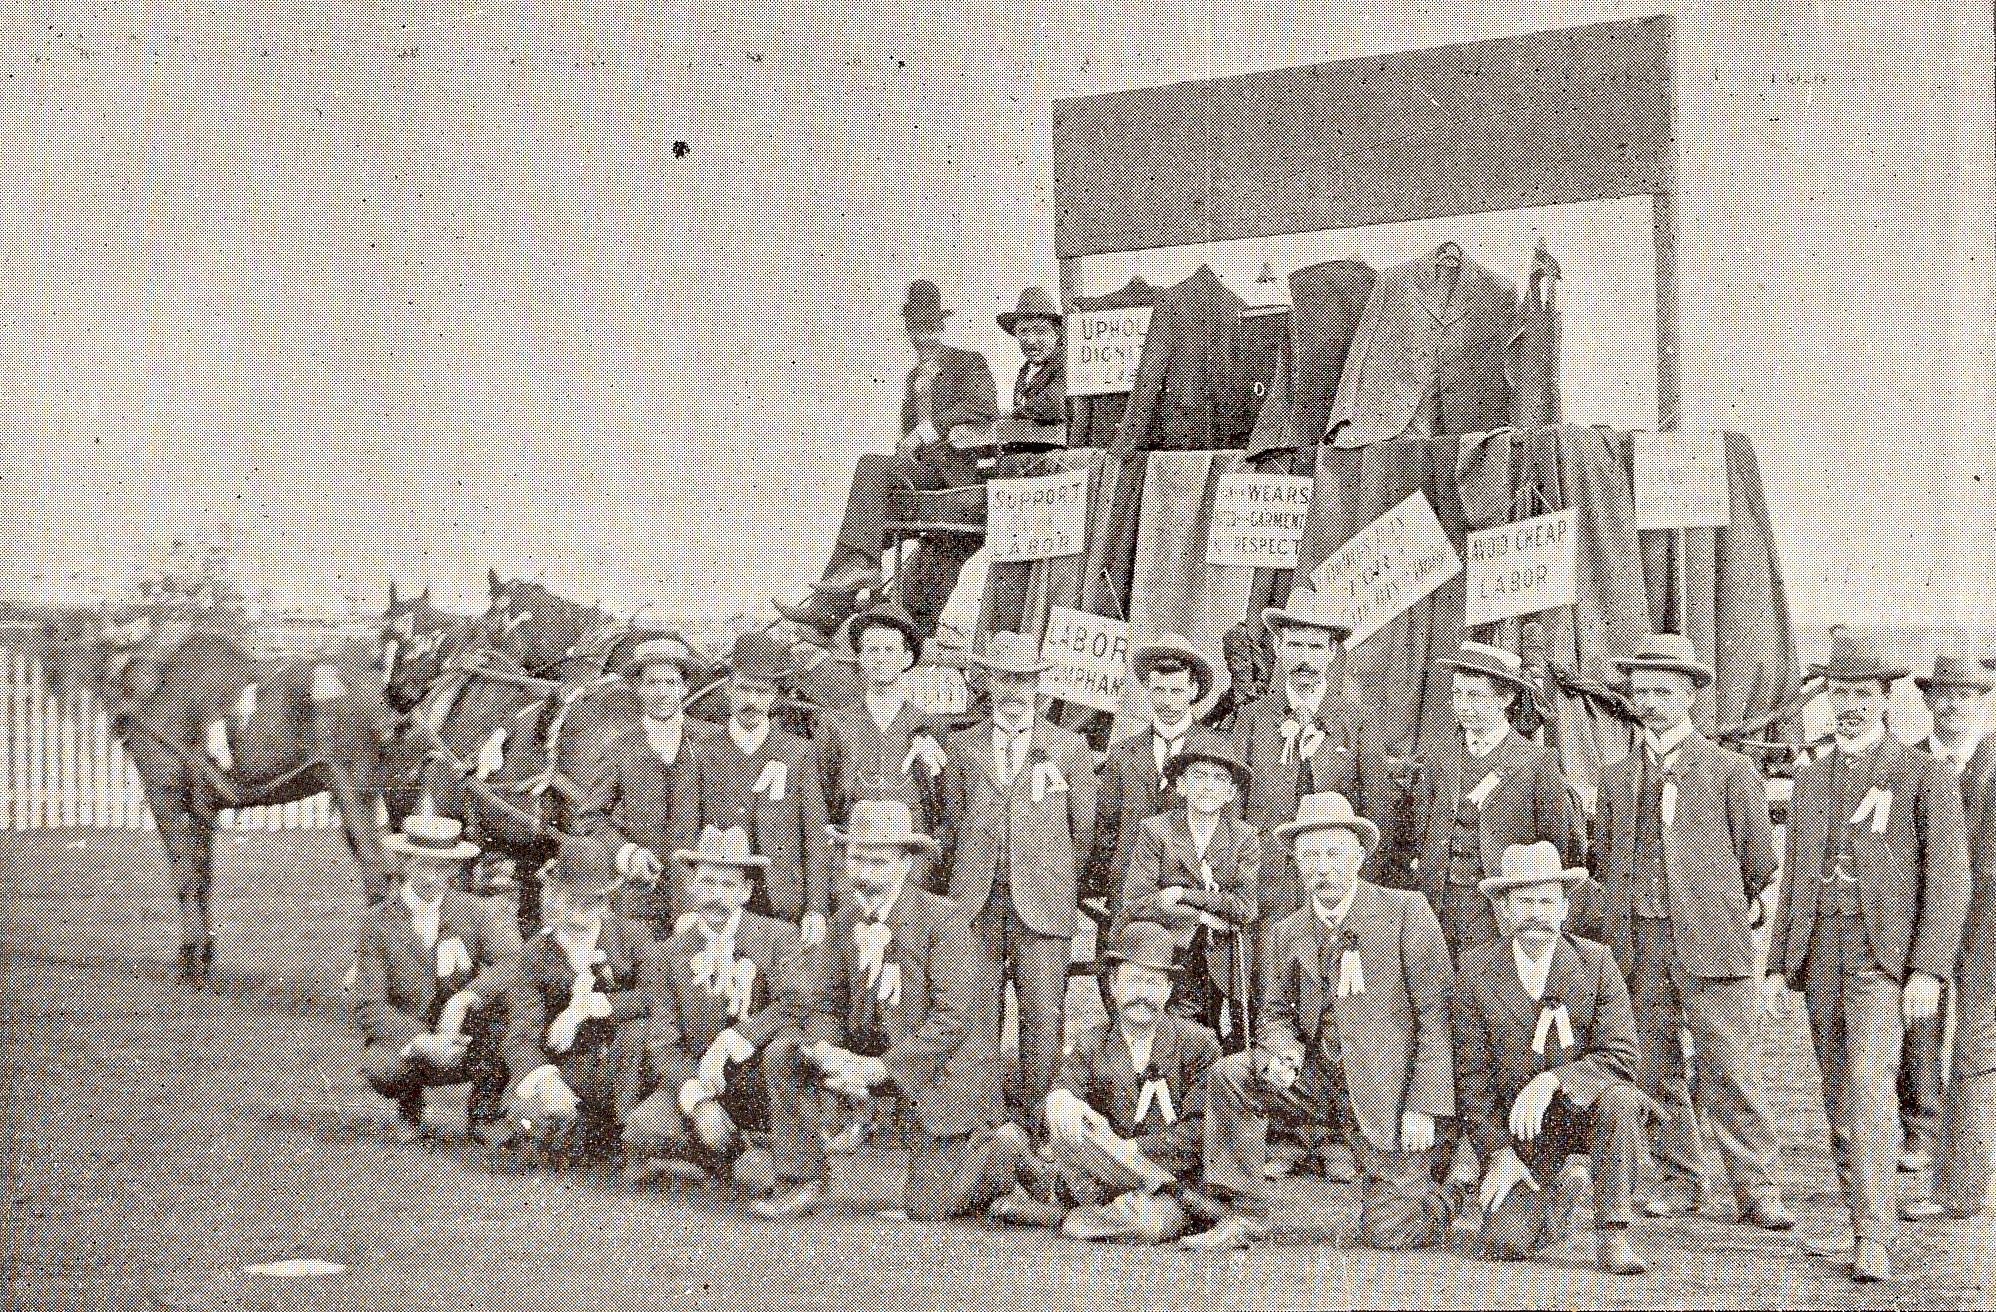 Tailors Union Float in 1904